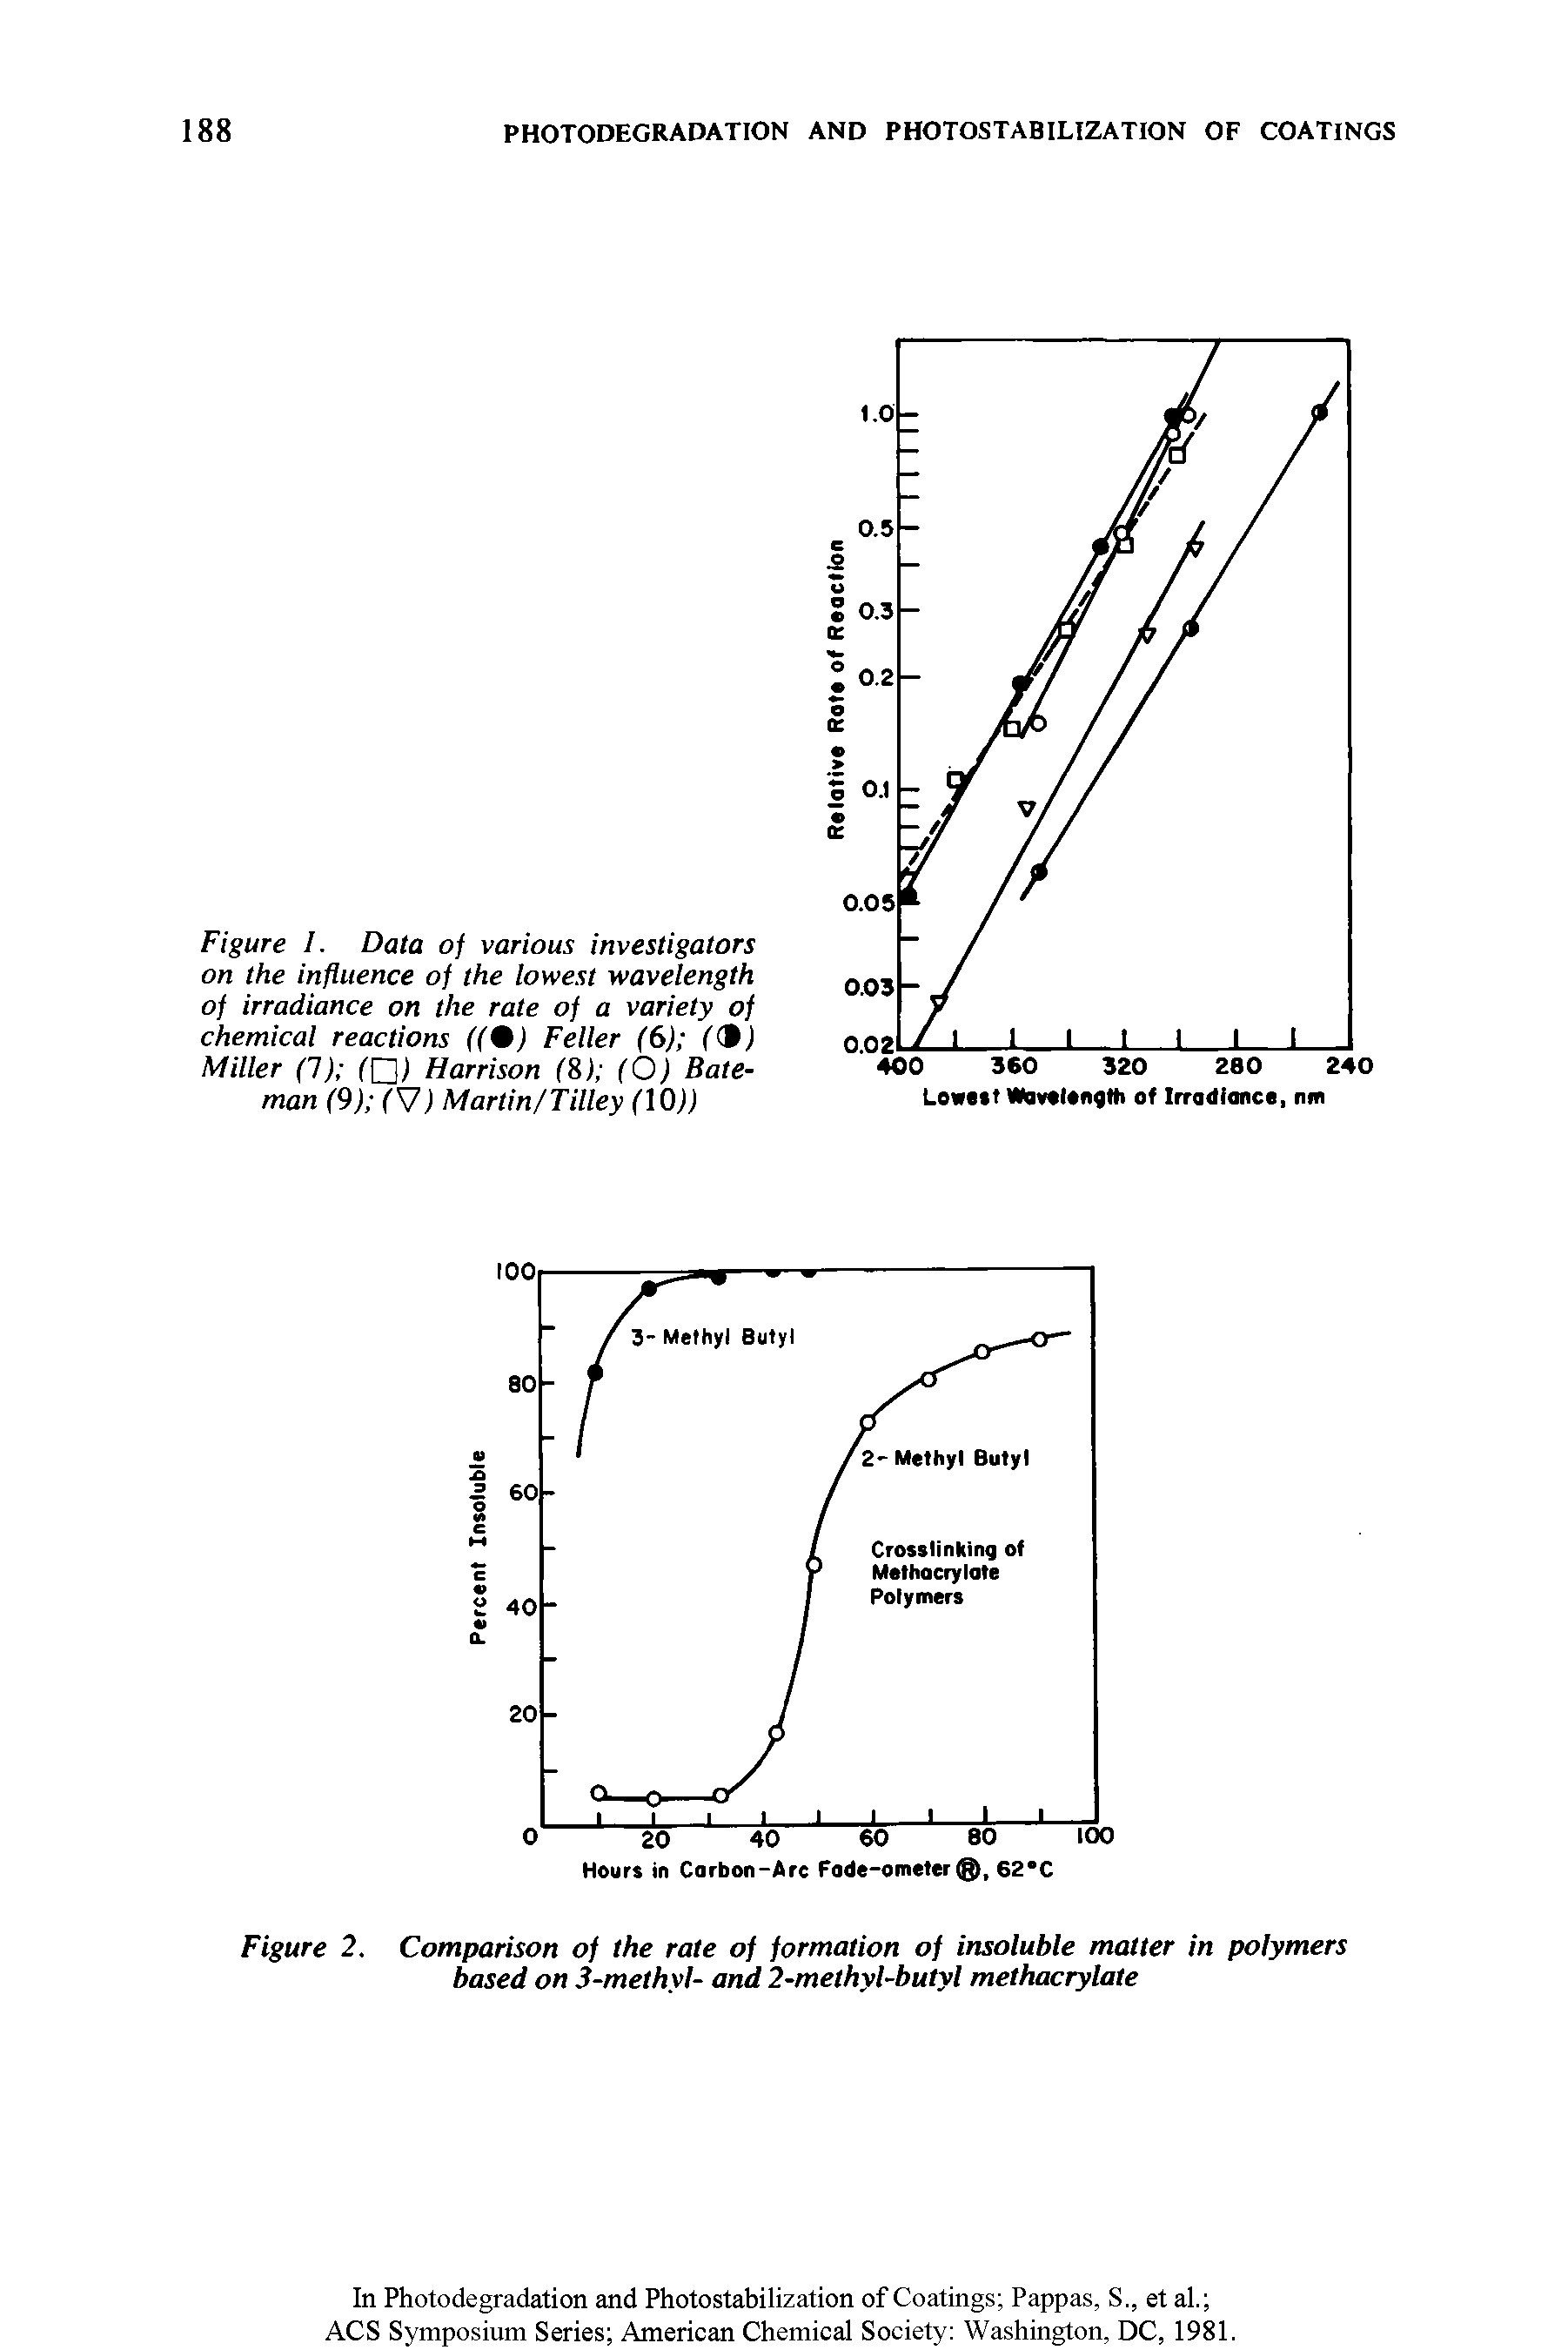 Figure 2. Comparison of the rate of formation of insoluble matter in polymers based on 3-methyl- and 2-methyl-butyl methacrylate...